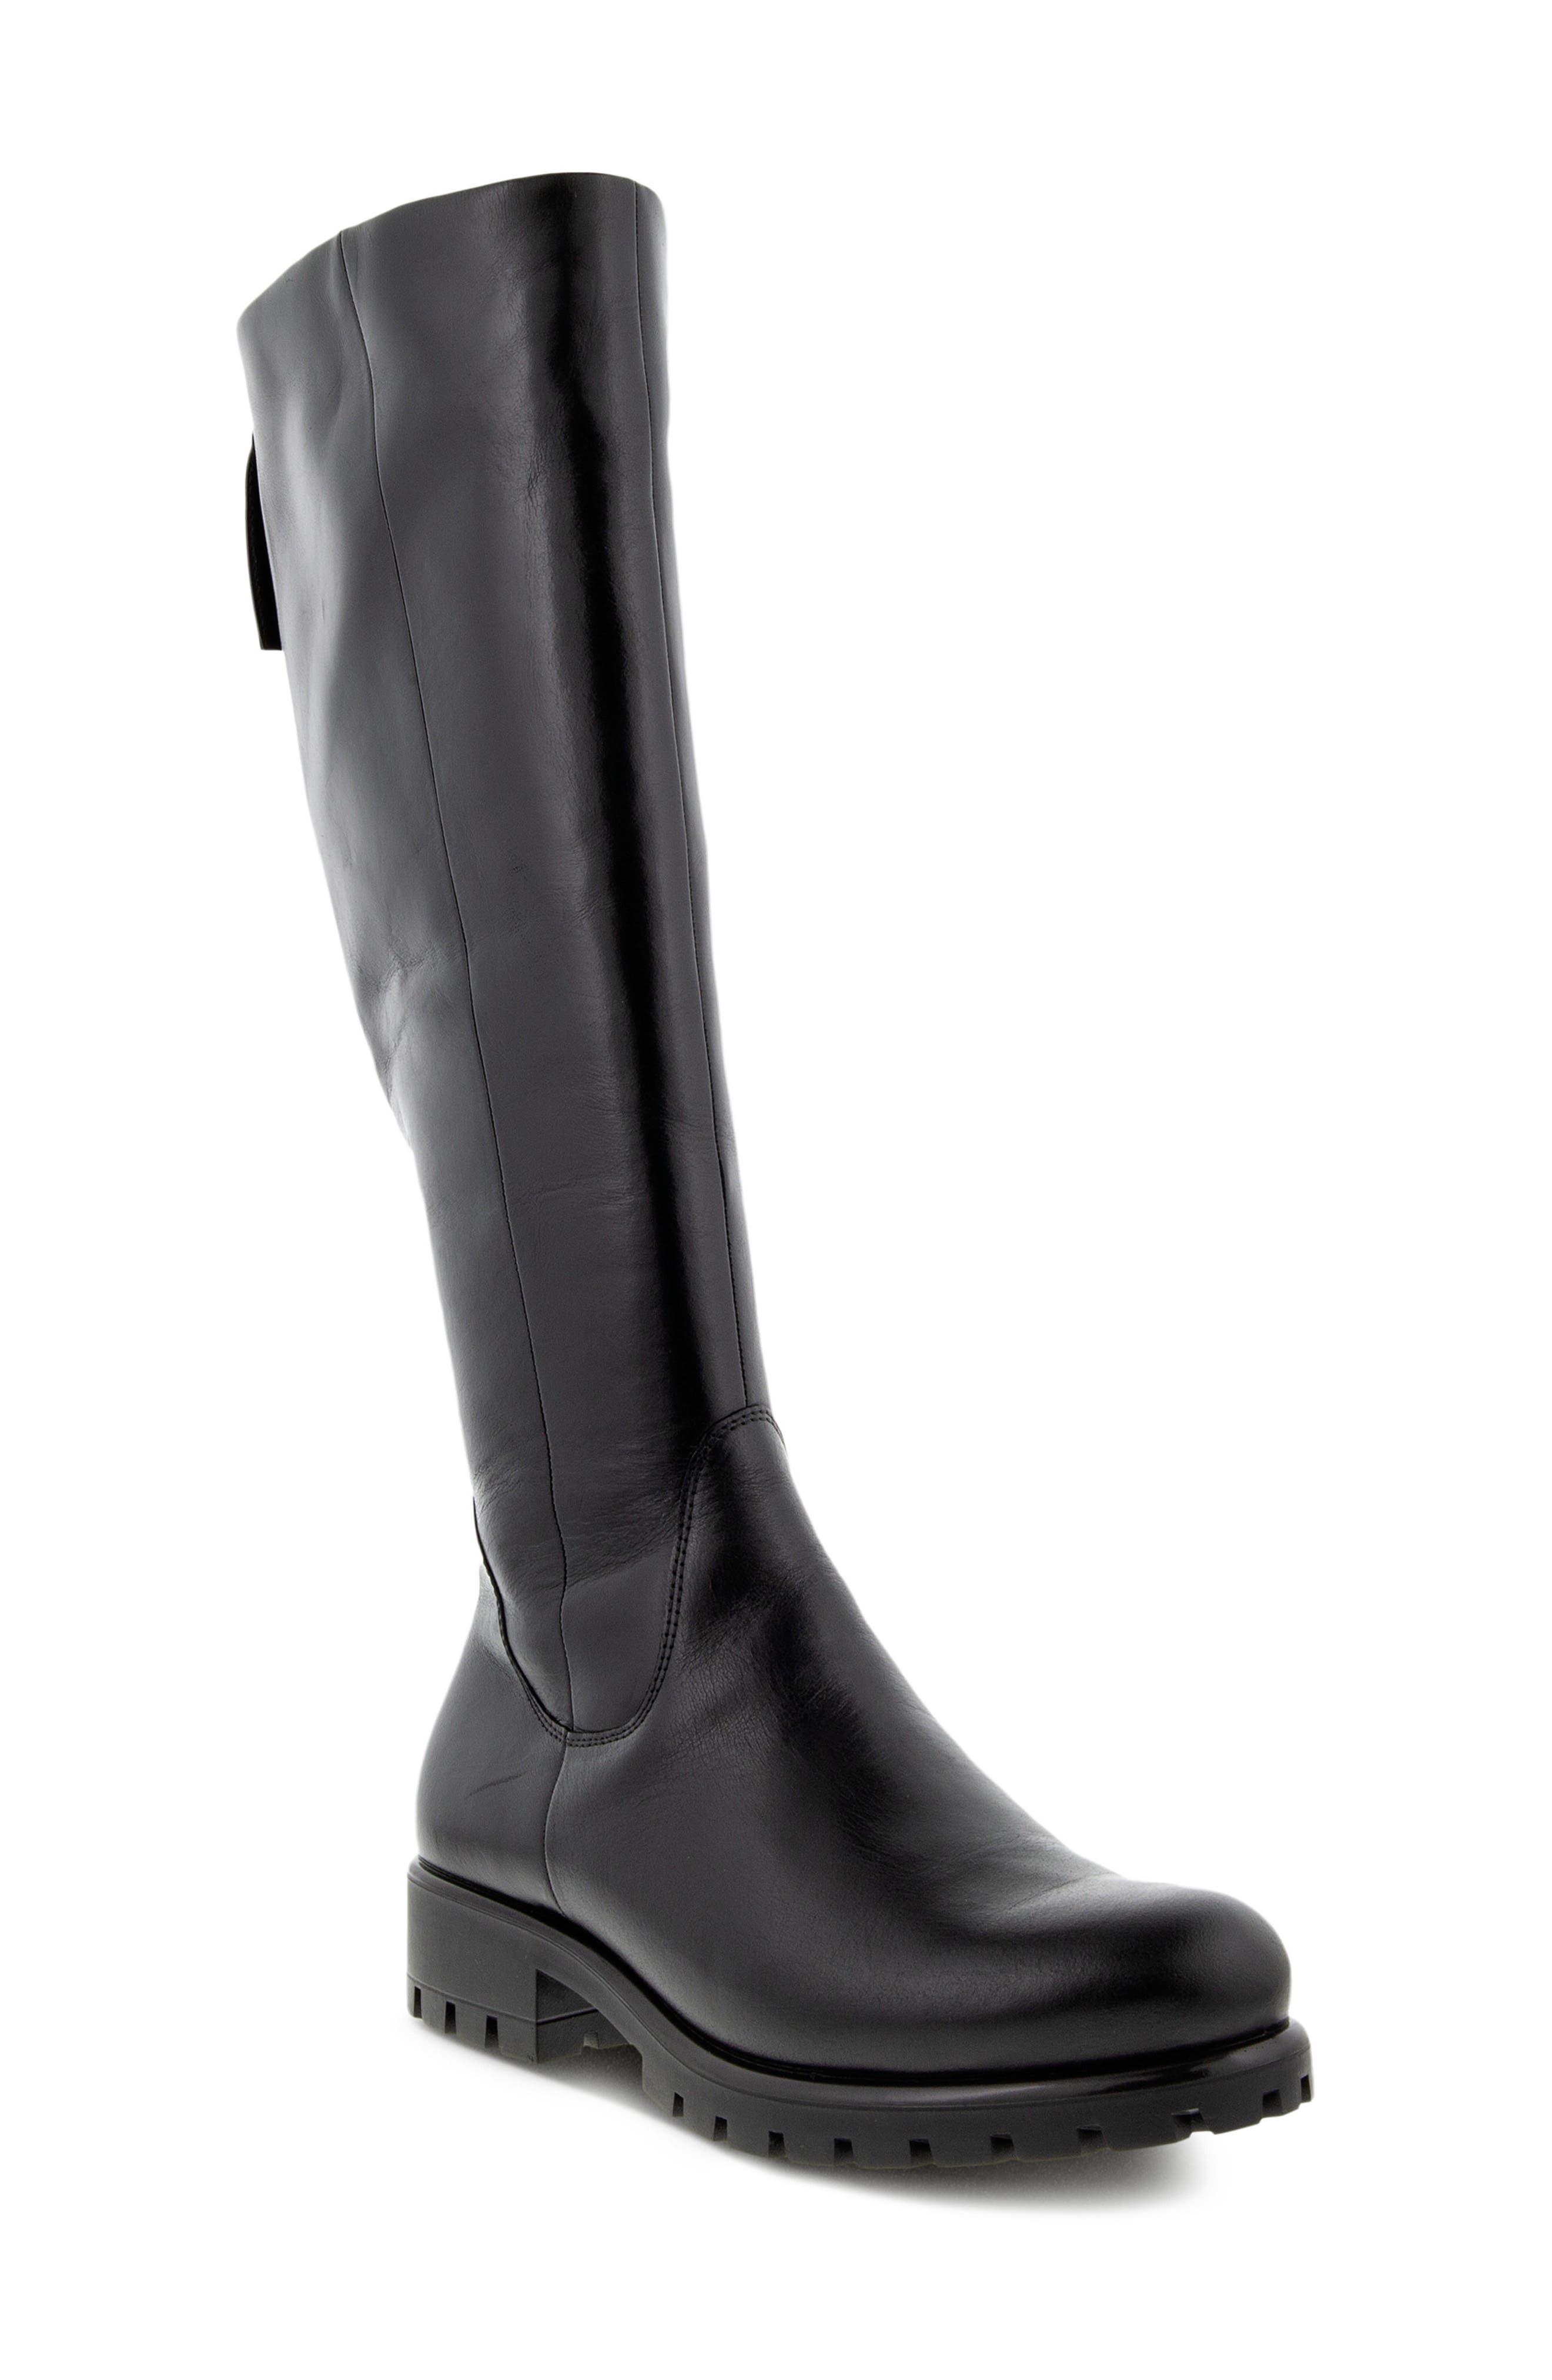 UPC 194890322370 product image for ECCO Modtray Knee High Boot in Black at Nordstrom, Size 6-6.5Us | upcitemdb.com